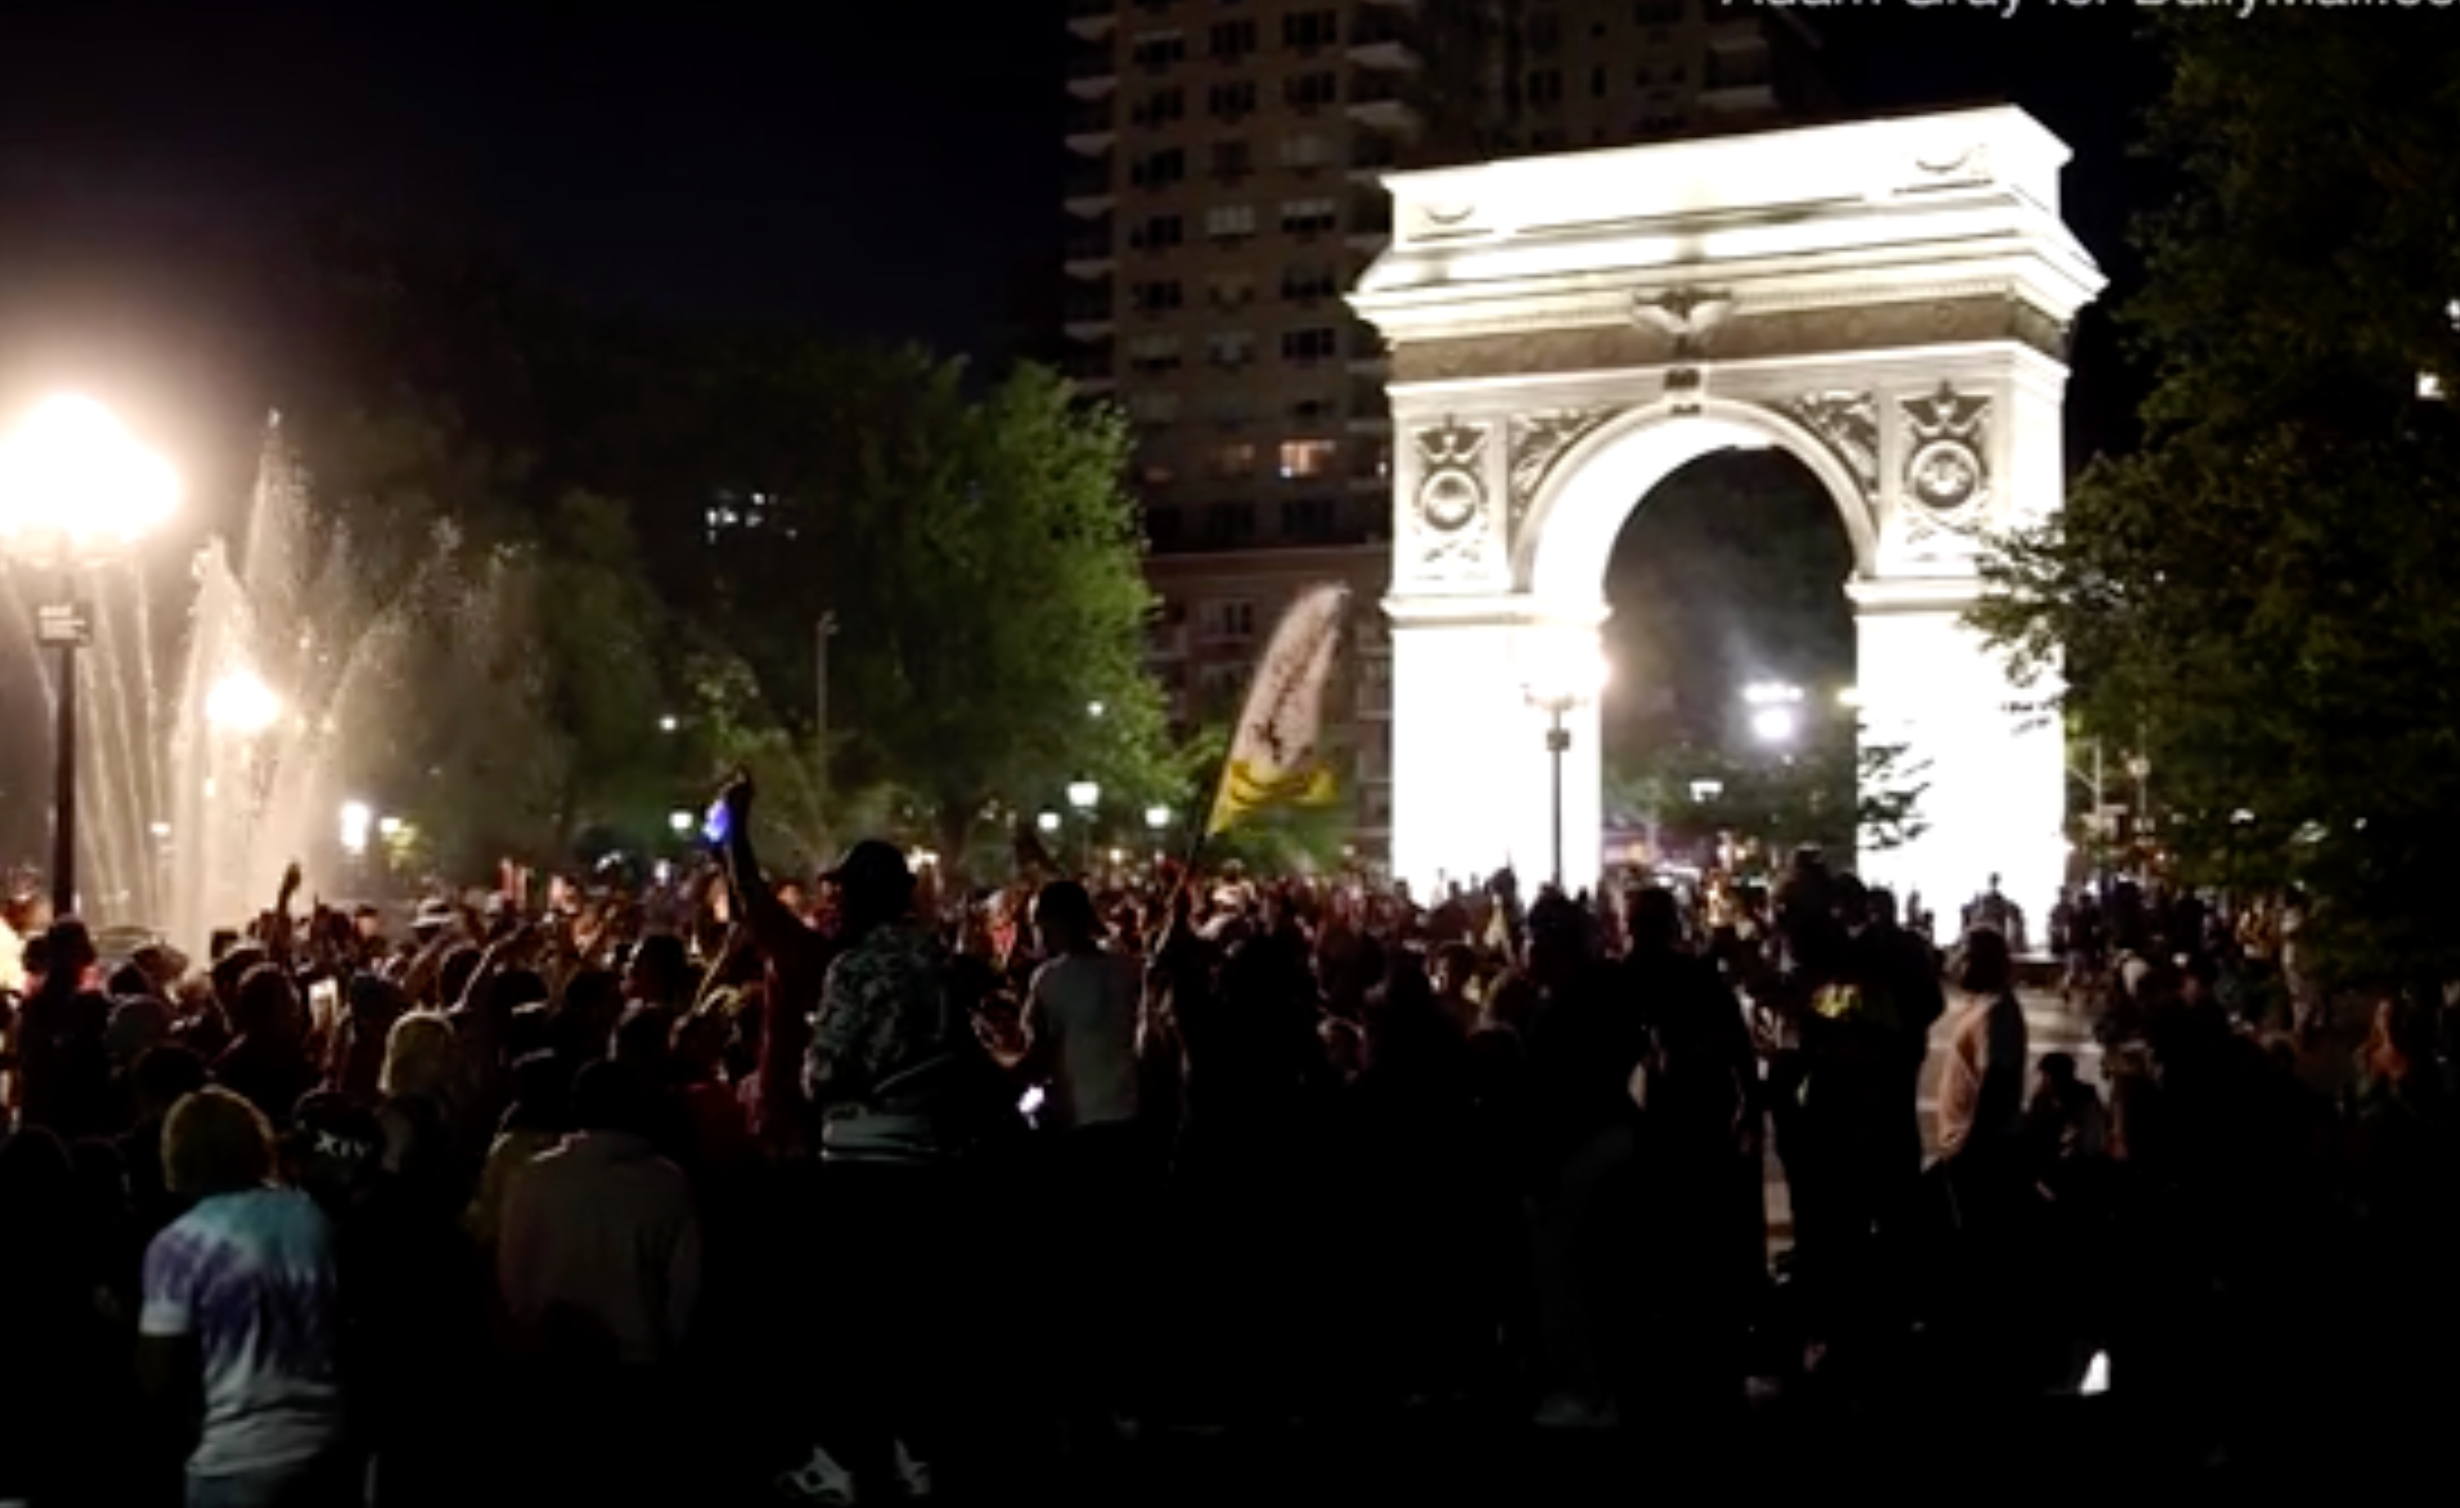 Party in Washington Square Park led to injuries and complaints from neighbours